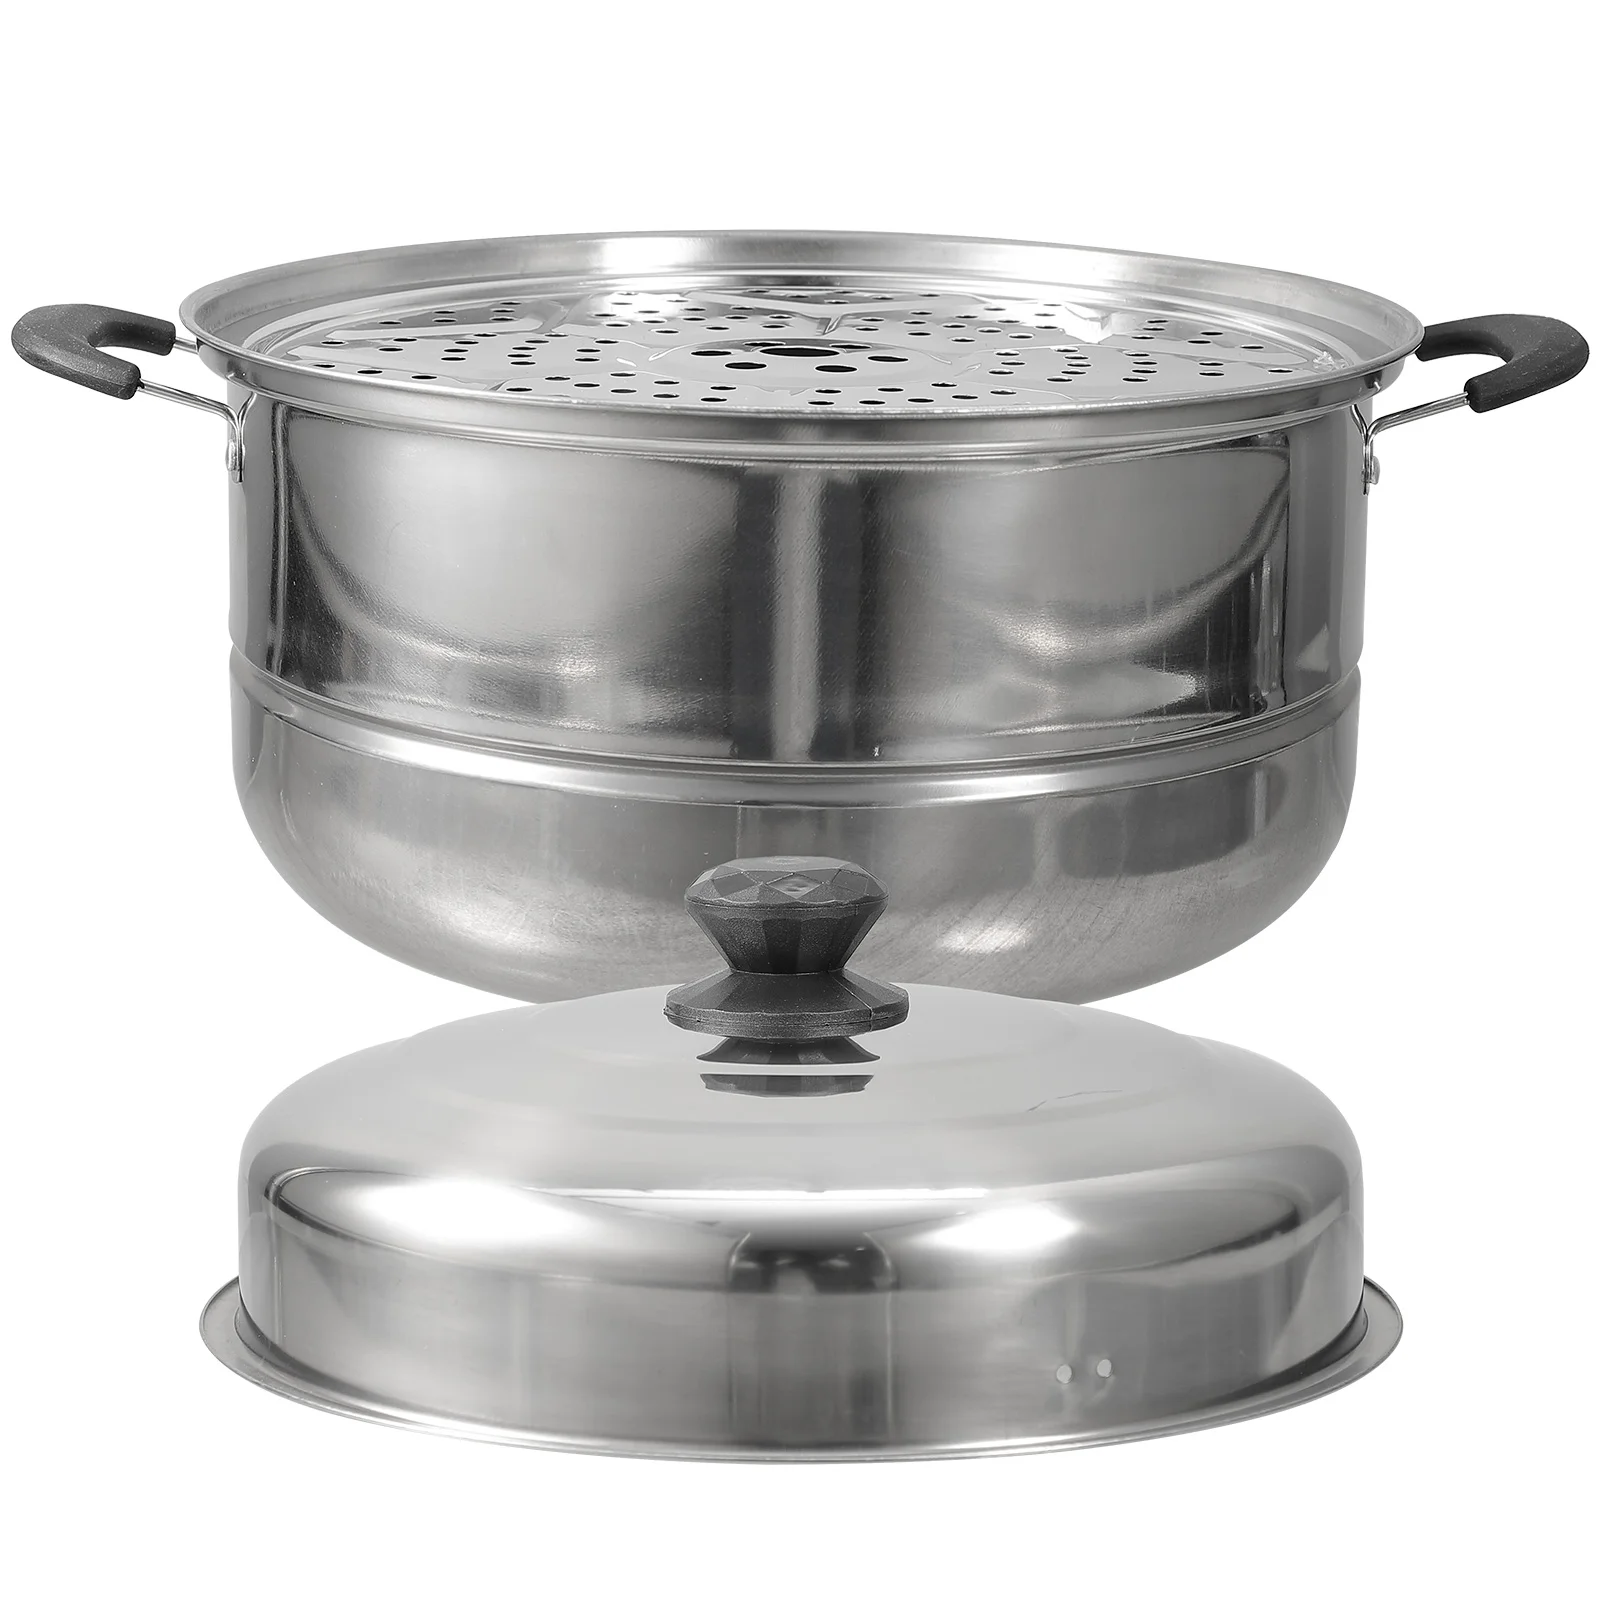 

Stainless Steel Steamer Vegetables Food Kitchen Tools Cooking Pot Double-layered Stockpot Work Garer